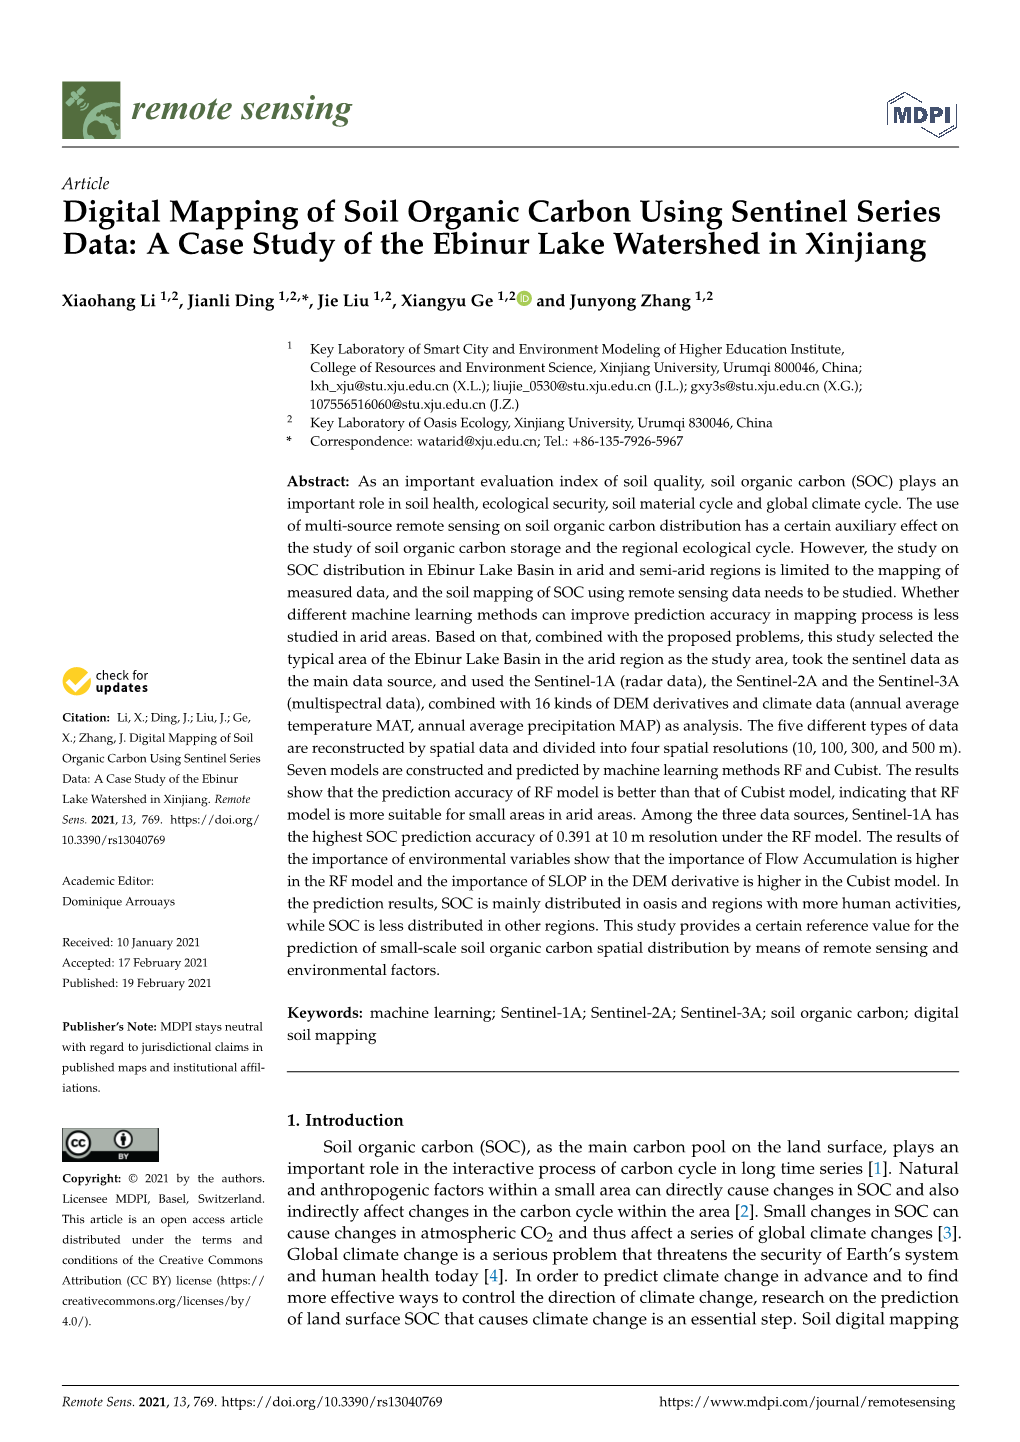 Digital Mapping of Soil Organic Carbon Using Sentinel Series Data: a Case Study of the Ebinur Lake Watershed in Xinjiang